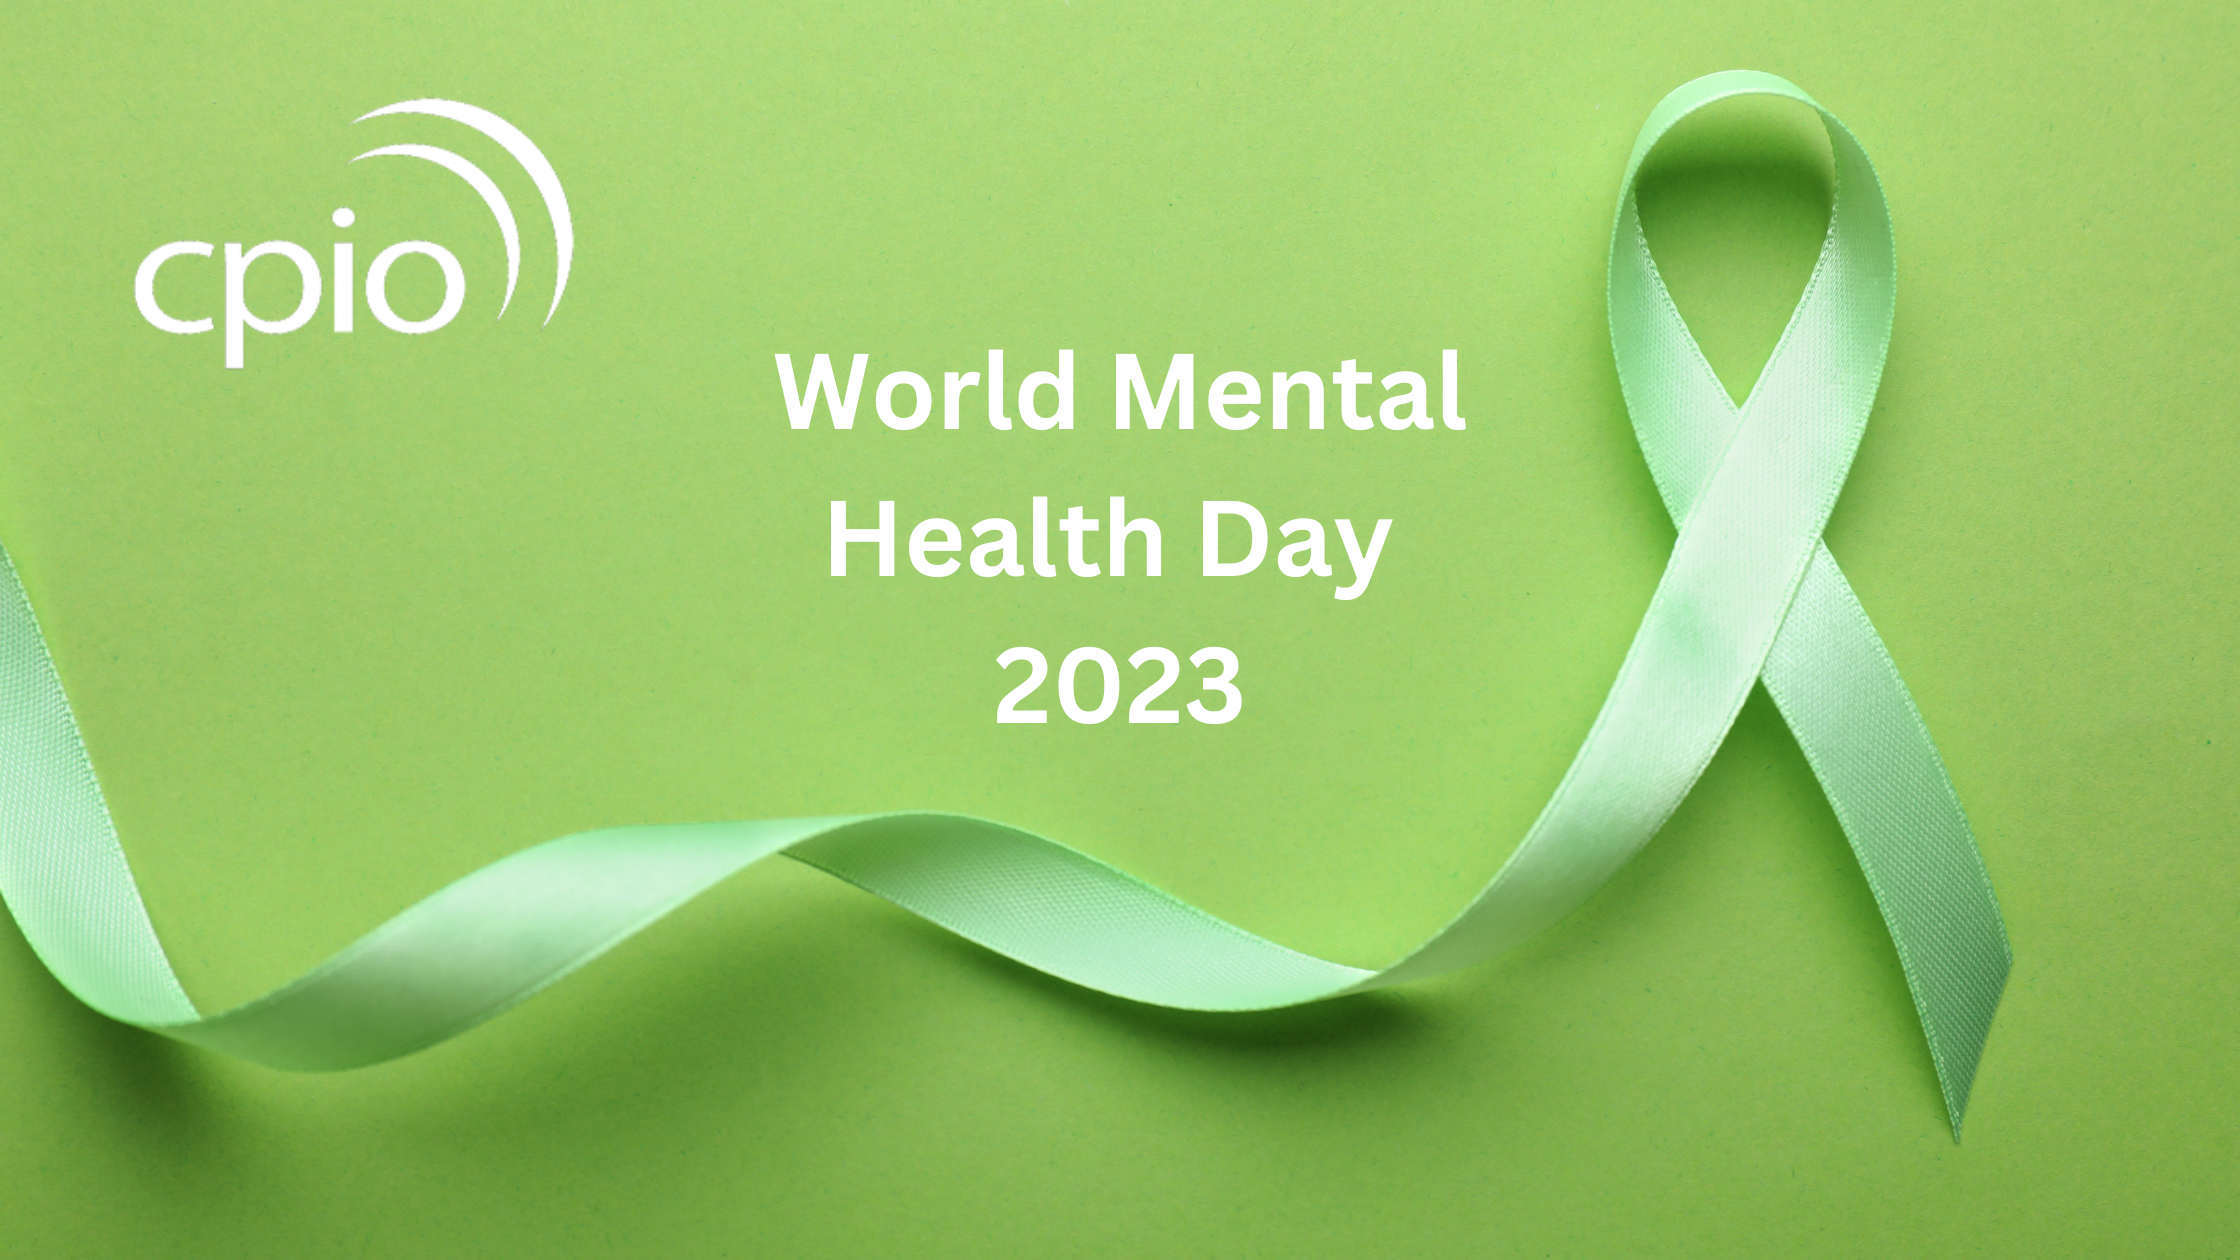 Tuesday October 10th marks World Mental Health Day 2023